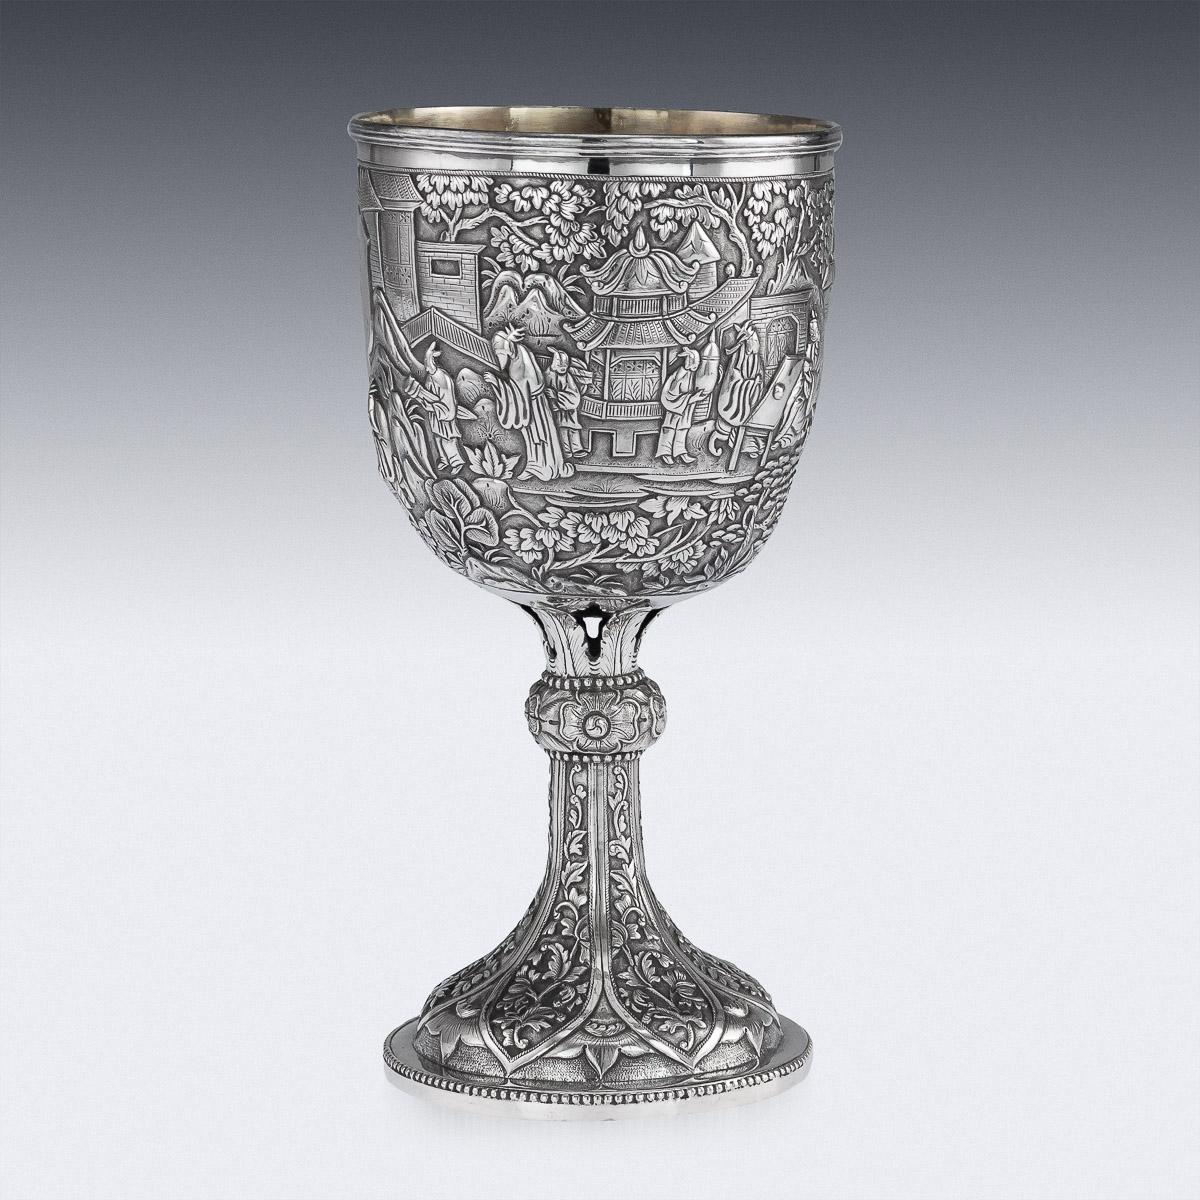 Antique 19th century Chinese export solid silver wine goblet, impressive and exceptionally fine quality, richly gilt inside, fully chased and embossed with a dense village scenes and receptions before scholars & nobility, cup resting on a highly